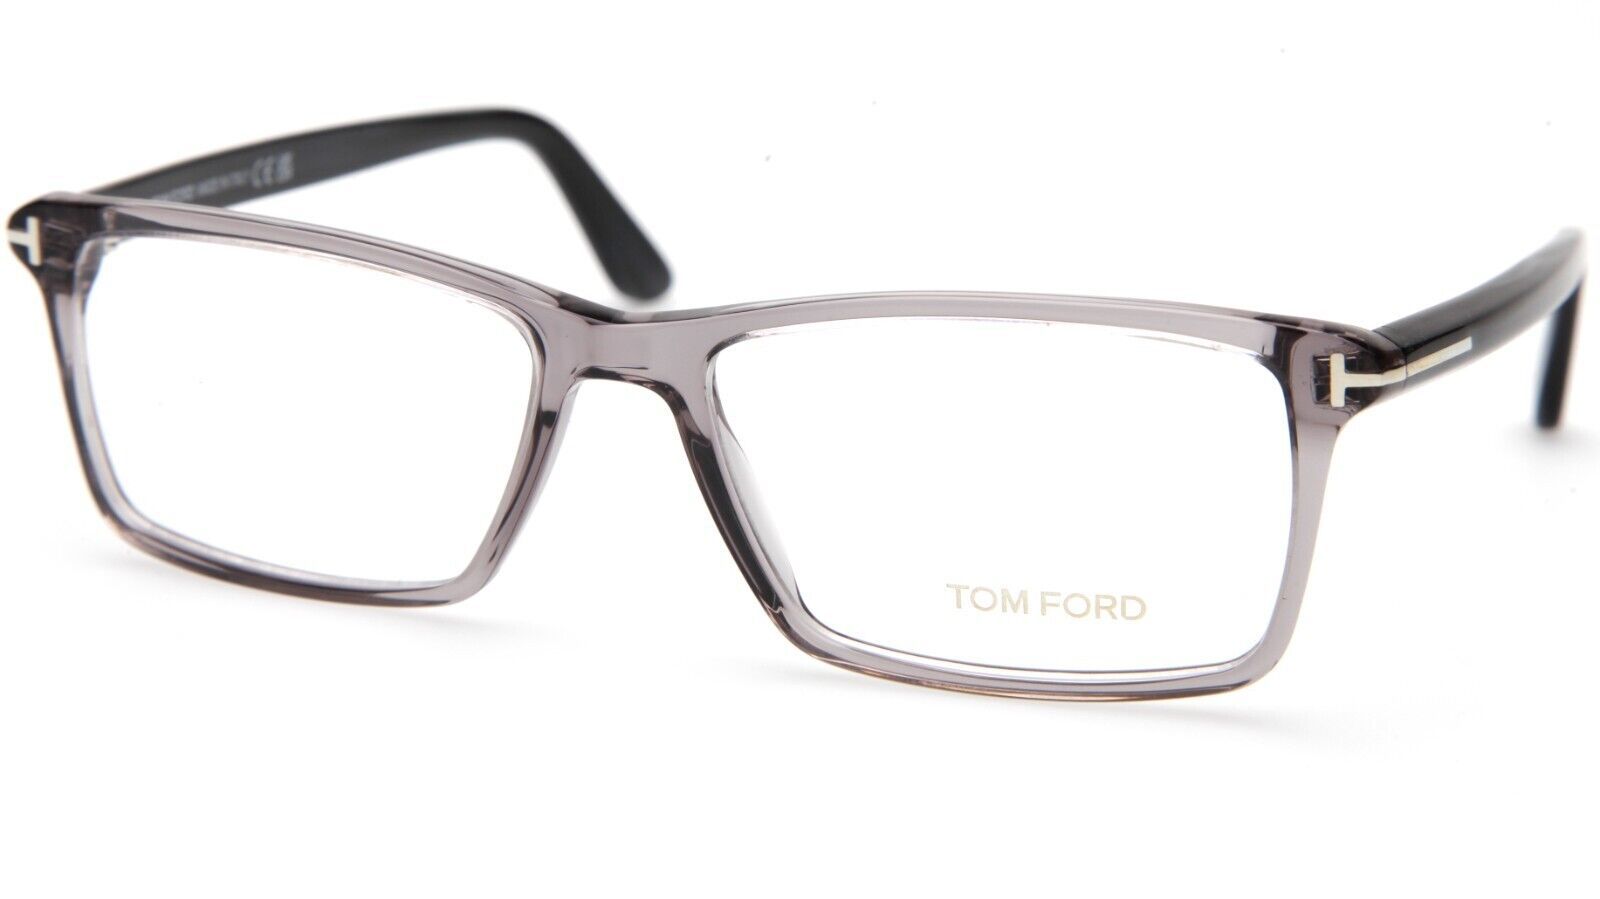 Primary image for NEW TOM FORD TF5408 020 Gray Eyeglasses Frame 56-16-145mm B36mm Italy